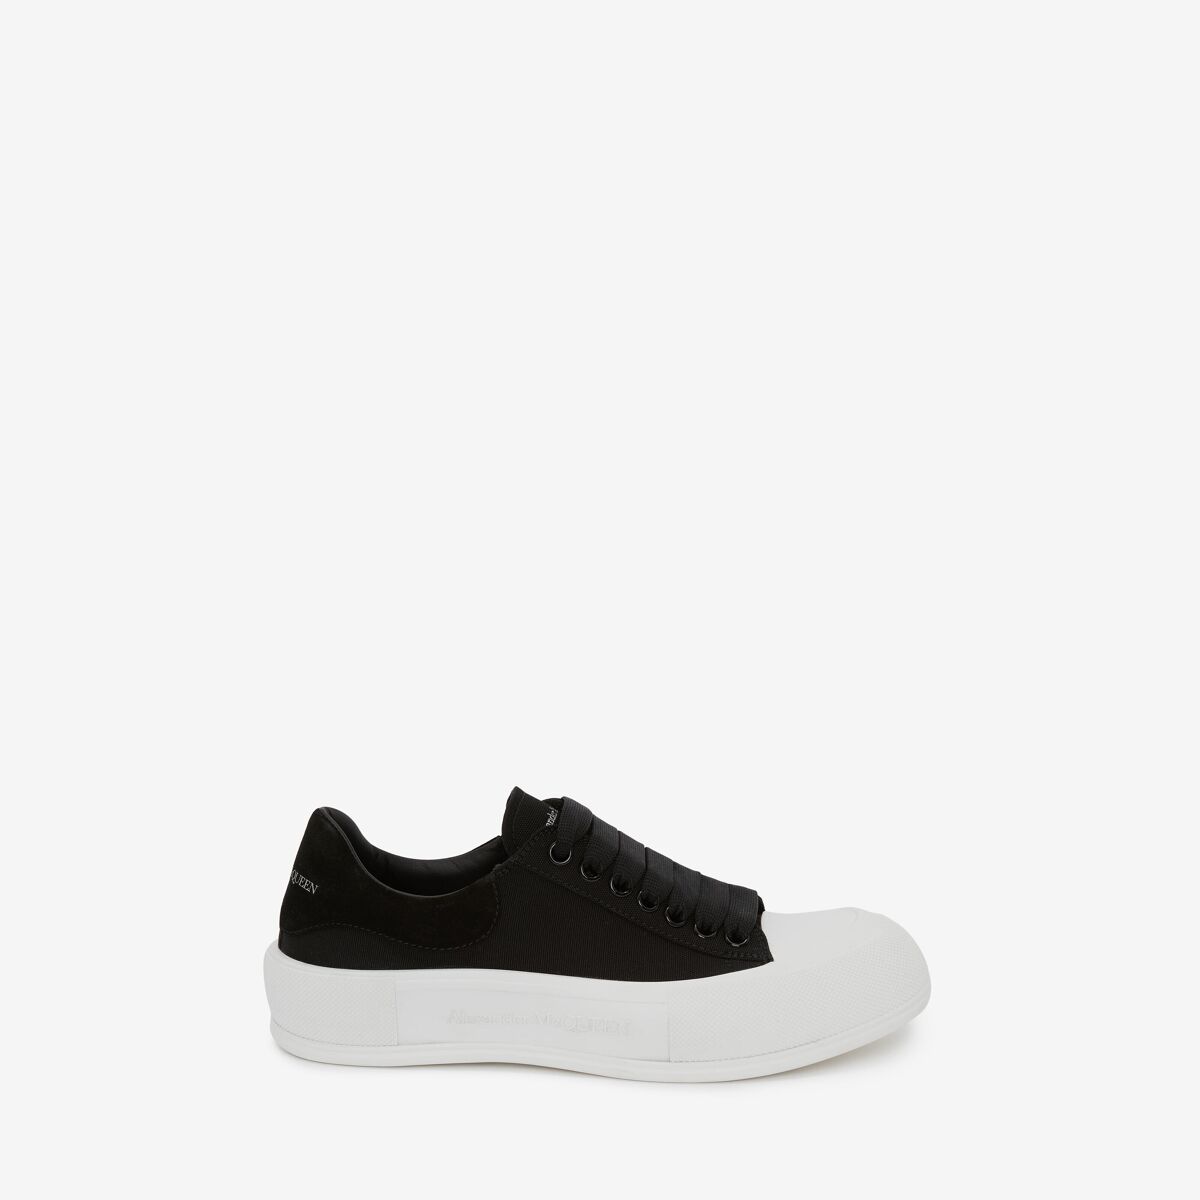 Alexander Mcqueen Deck Lace Up Plimsoll In Black/white